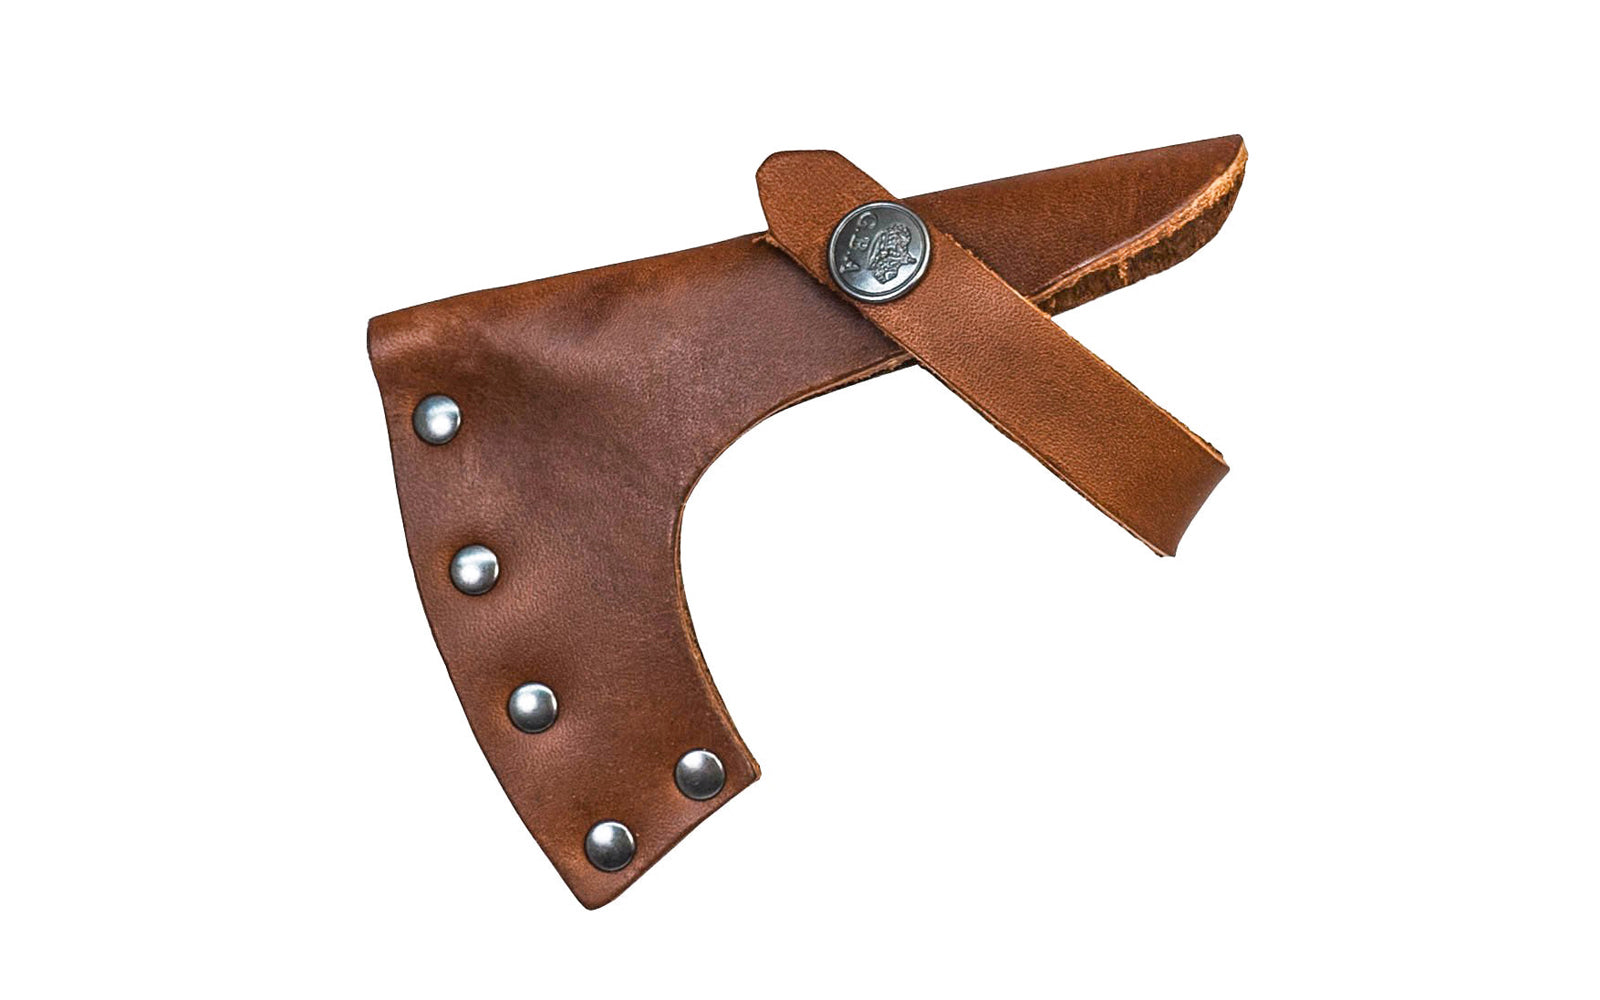 Gränsfors Bruk grain leather sheath is designed for the Mini Hatchet No. 410. The vegetable-tanned leather is free from heavy metals & is biodegradable. This sheath will also work with the No. 473-R Carving Axe. 7391765410085. Model 410C